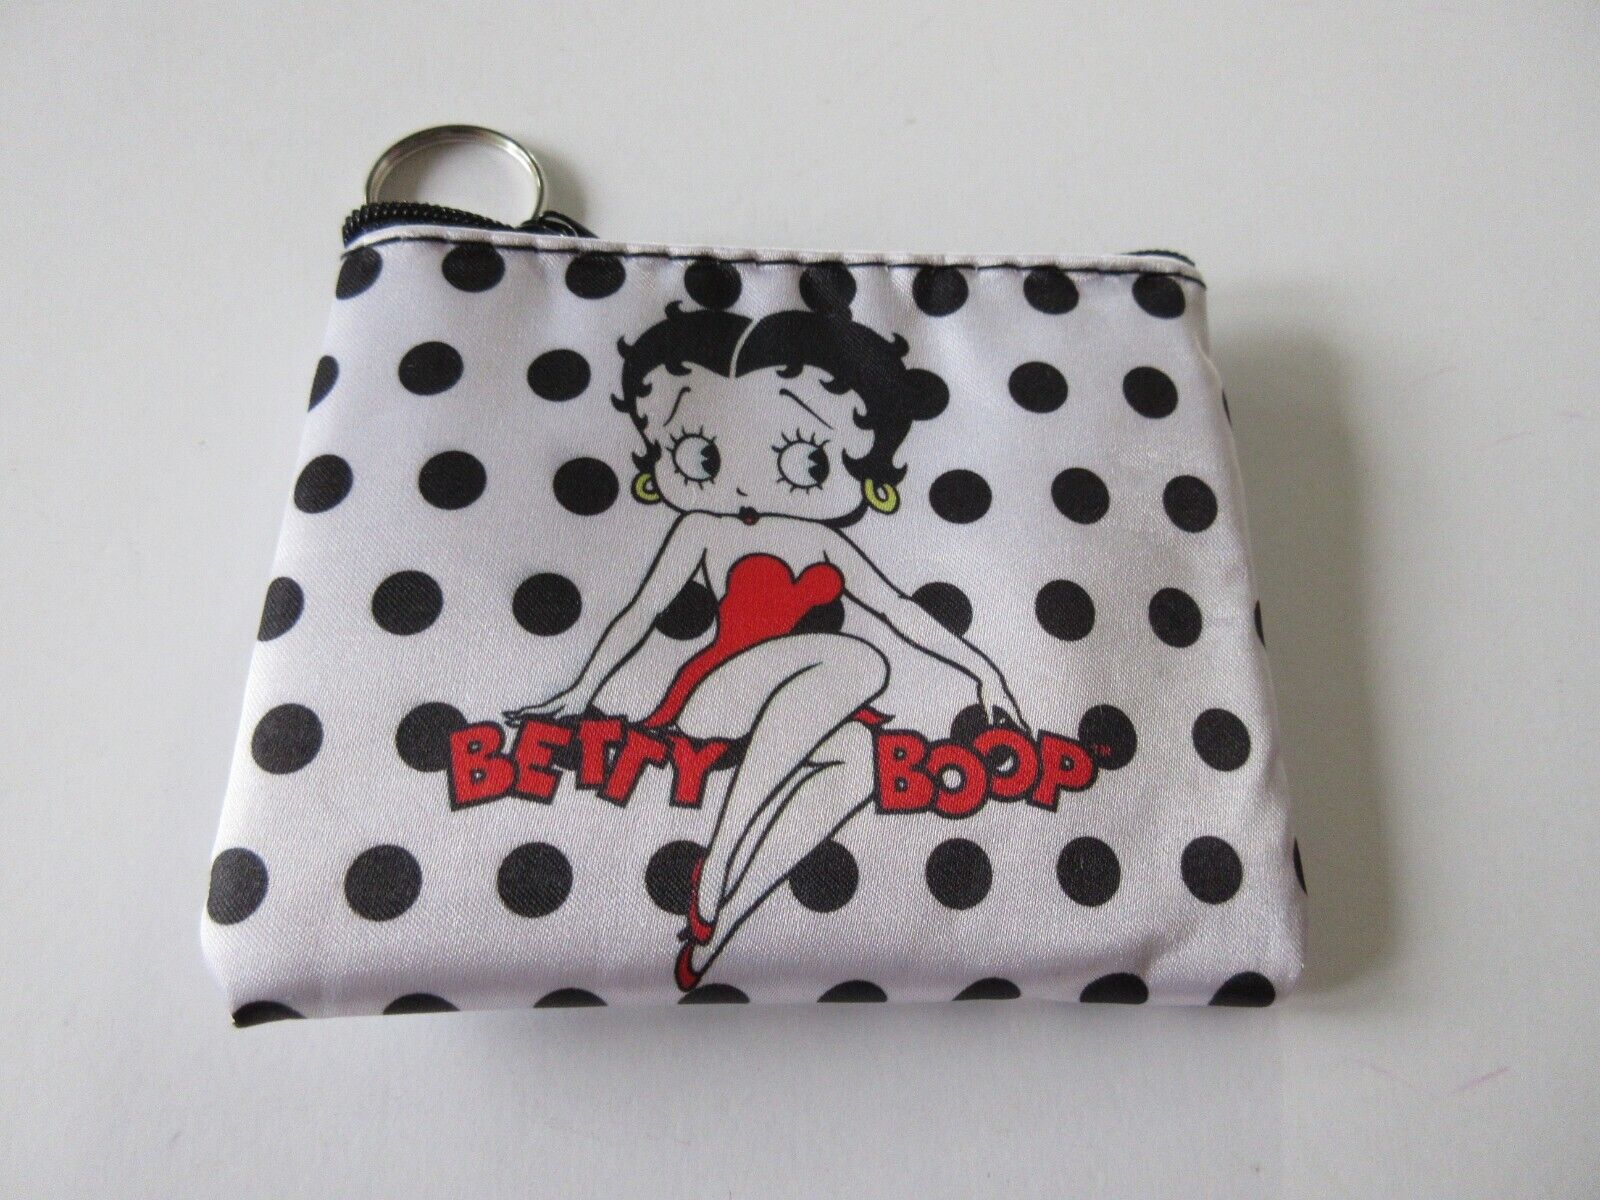 Betty Boop White With Black Polka Dot Key Chain Coin Purse - Licensed New